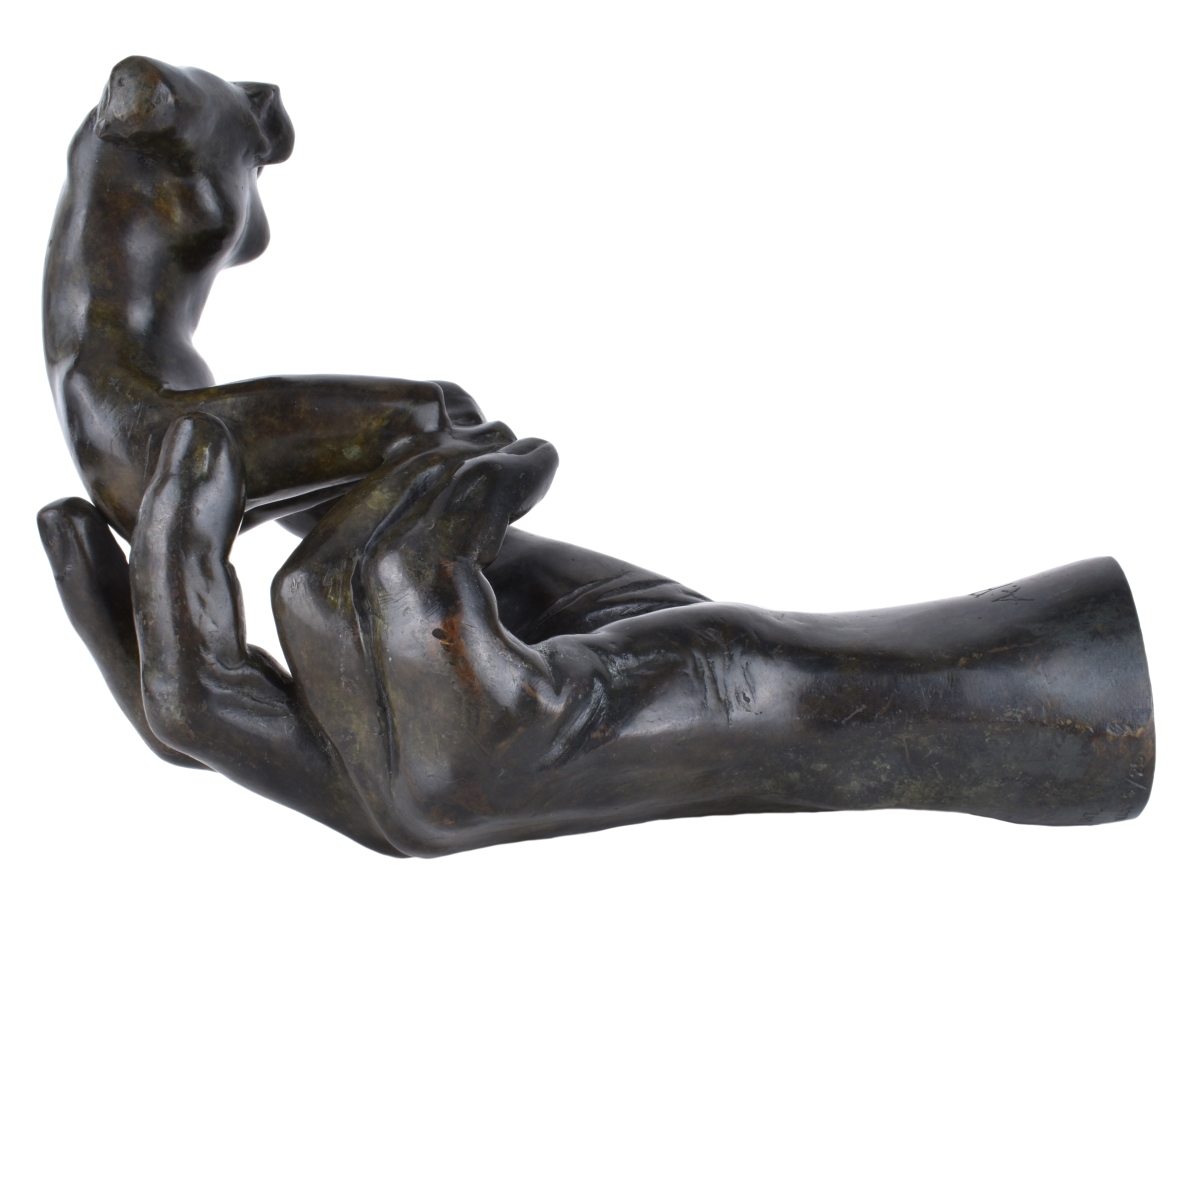 Auguste Rodin, French (1840 - 1917)